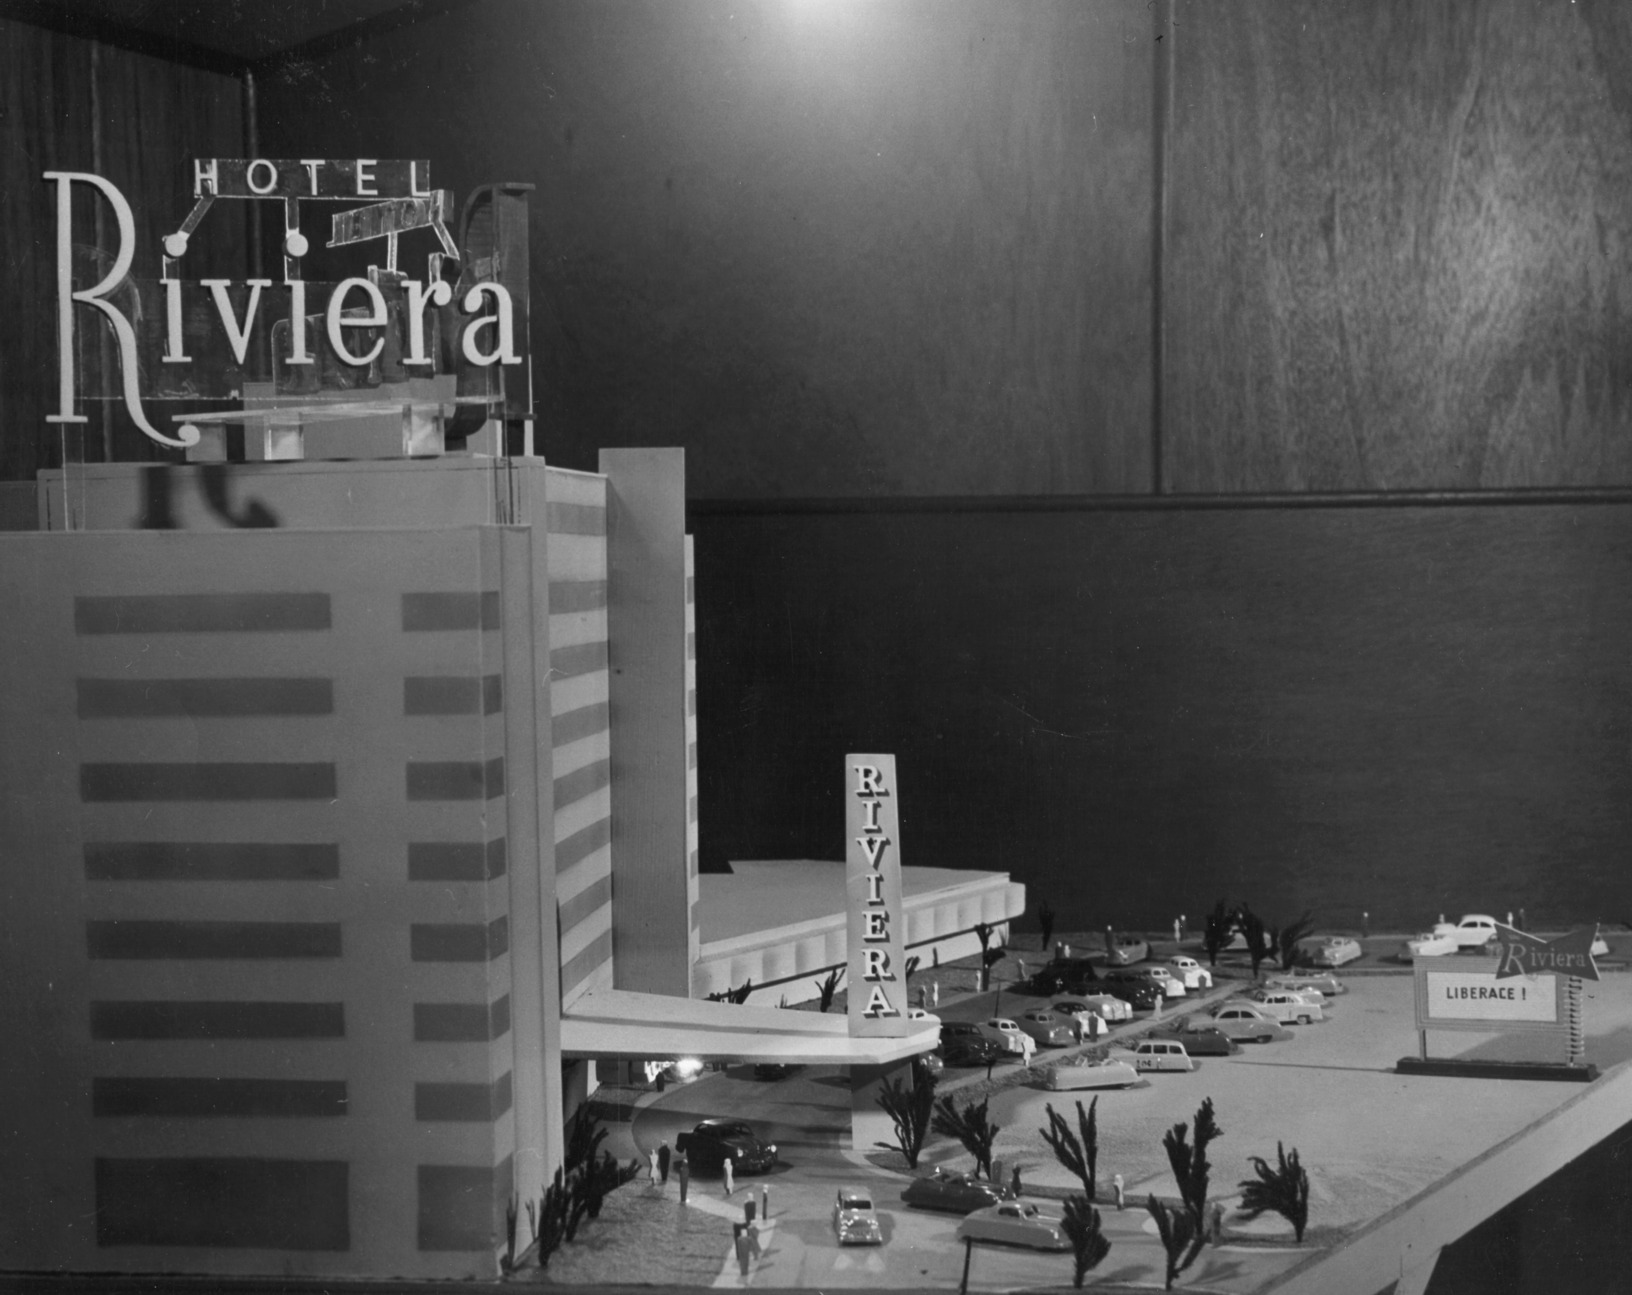 Photograph of a side view of a scale model of the Riviera Hotel and Casino (Las Vegas), 1955